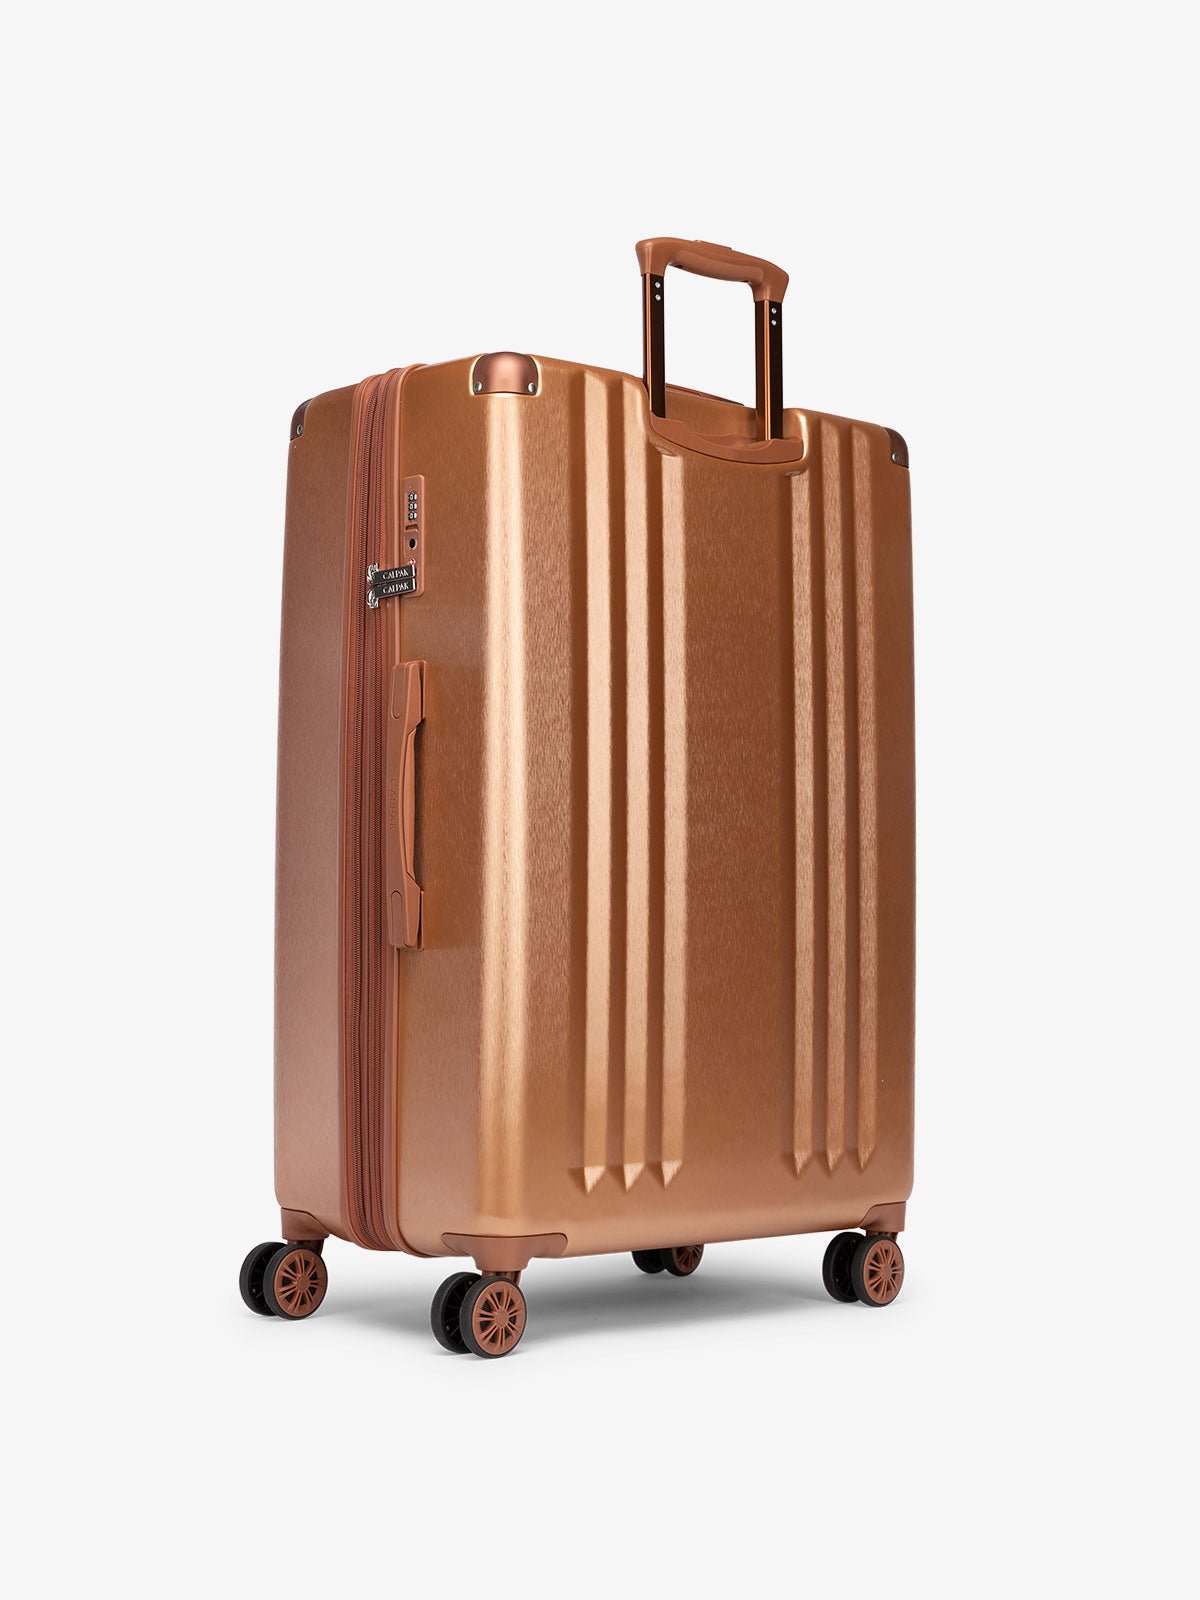 Large 30 inch lightweight hard shell suitcase in copper